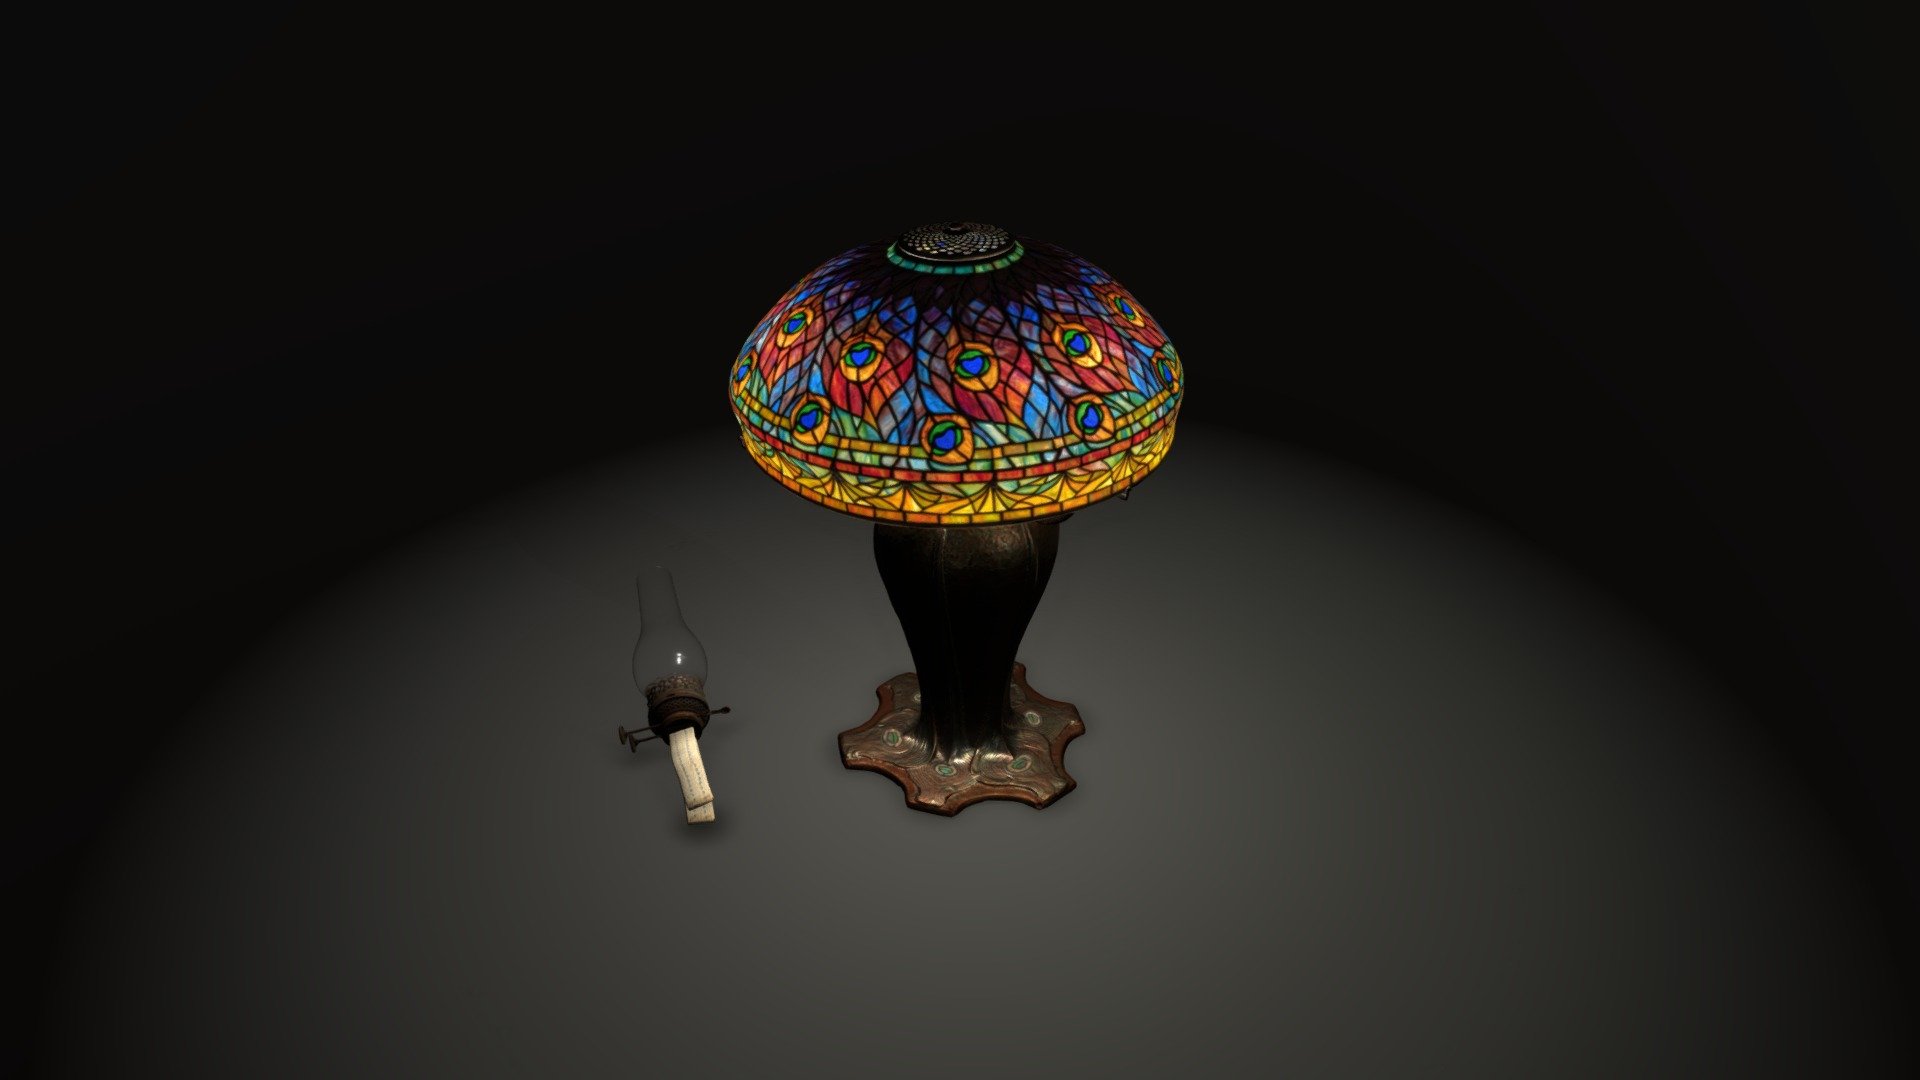 You can copy, modify, and distribute this work, even for commercial purposes, all without asking permission. Learn more about The Cleveland Museum of Art’s Open Access initiative: http://www.clevelandart.org/open-access-faqs

Peacock Table Lamp (c. 1900-1902) designer probably by Clara Wolcott Driscoll (American, 1861-1944) maker probably by Tiffany Studios (American, 1902-1932). Leaded glass, bronze
Diameter: 48 cm (18 7/8 in.); Overall: 65 cm (25 9/16 in.) Bequest of Charles Maurer, 2018.281

Learn more on the Cleveland Musuem of Art's Collection Online: https://www.clevelandart.org/art/2018.281 

Model created by Dale Utt 3d model